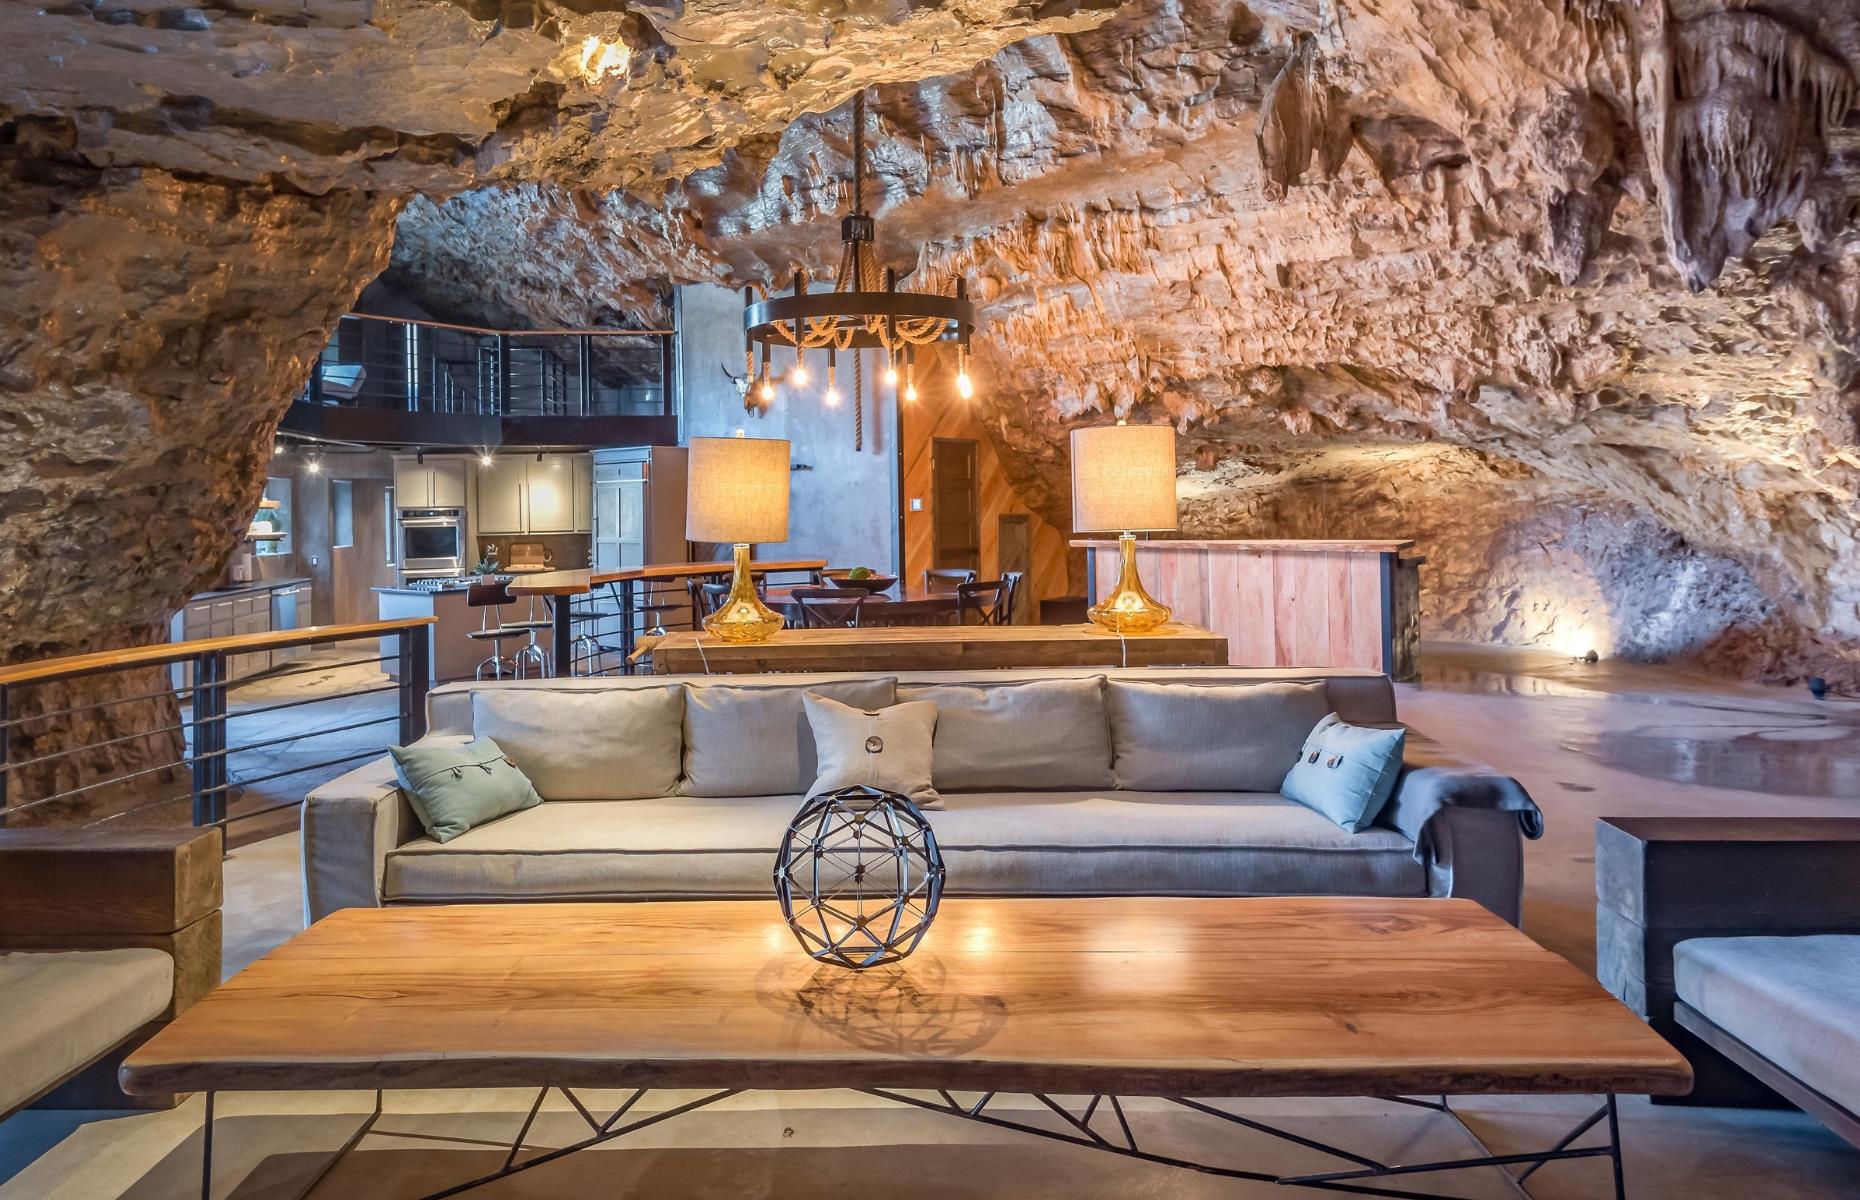 <p>The <a href="https://www.loveproperty.com/gallerylist/73942/surreal-estate-the-worlds-weirdest-properties">surreal property</a> sits inside a 260-acre cavern, high up on a ledge overlooking the valley of Beckham Creek in the Ozark Mountains. The perfect luxury hideaway for an apocalypse or invasion, the pad is entirely hidden from the outside and sits so high up that no zombie would know you were there.</p>